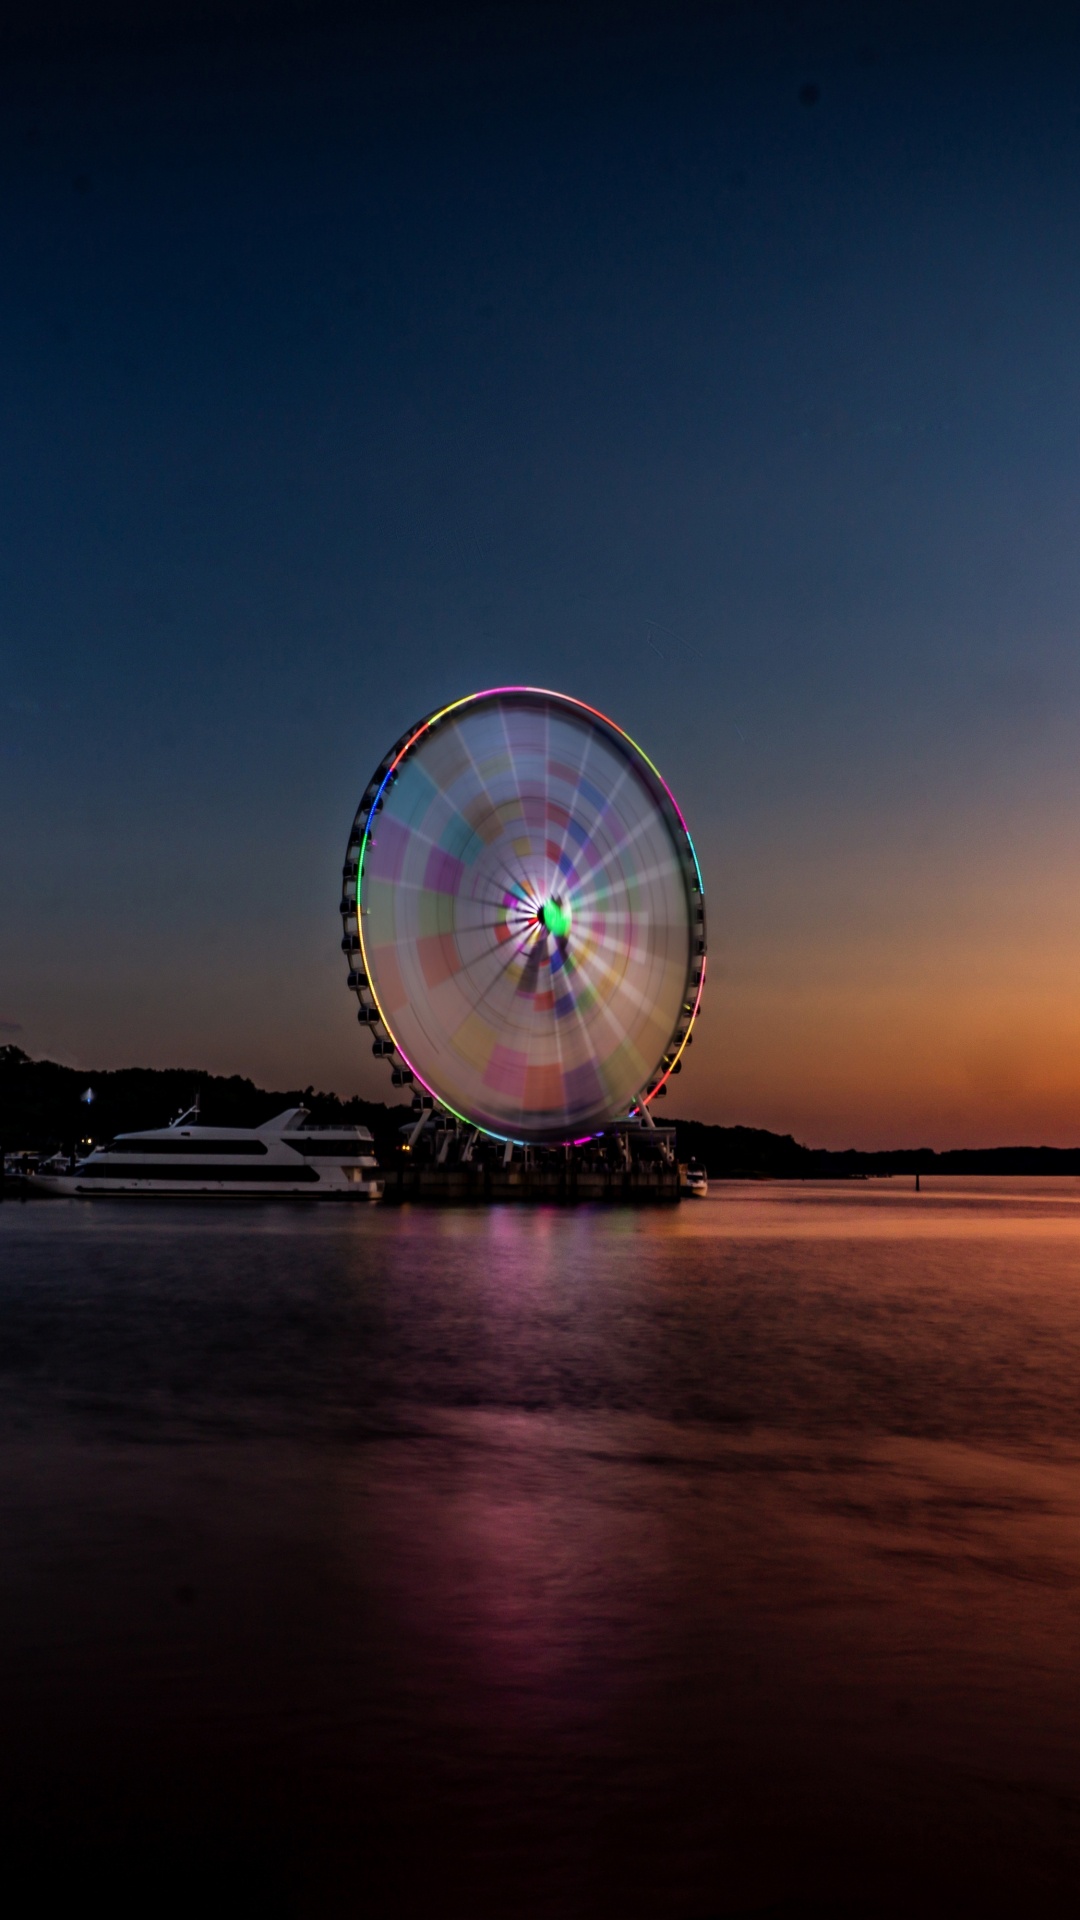 Ferris Wheel Near Body of Water During Night Time. Wallpaper in 1080x1920 Resolution